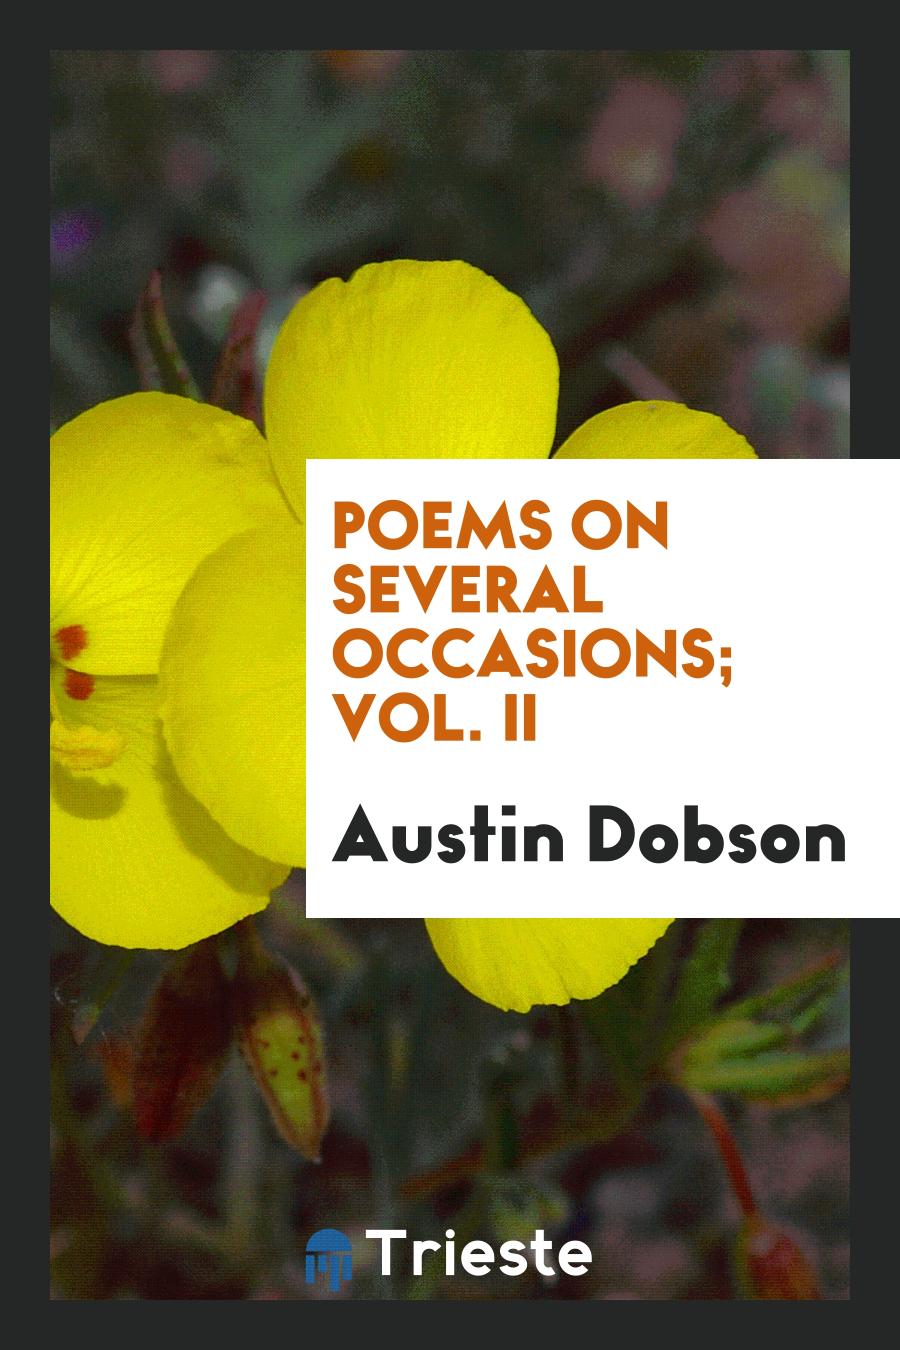 Poems on several occasions; Vol. II